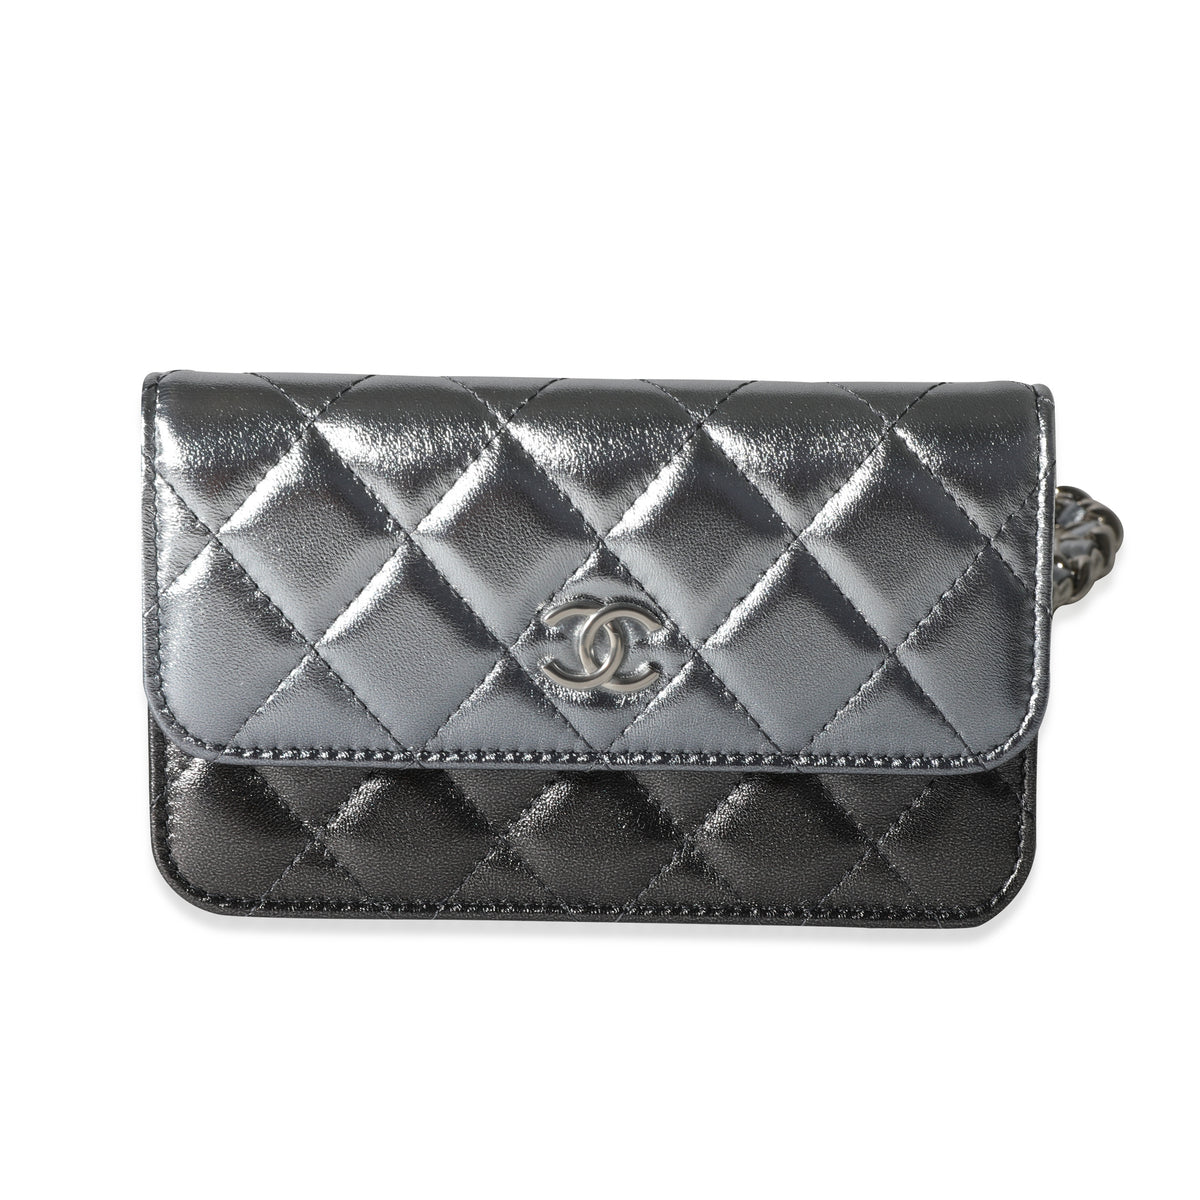 Chanel Dark Red Diamond Quilted Lambskin Leather Trendy WOC Clutch